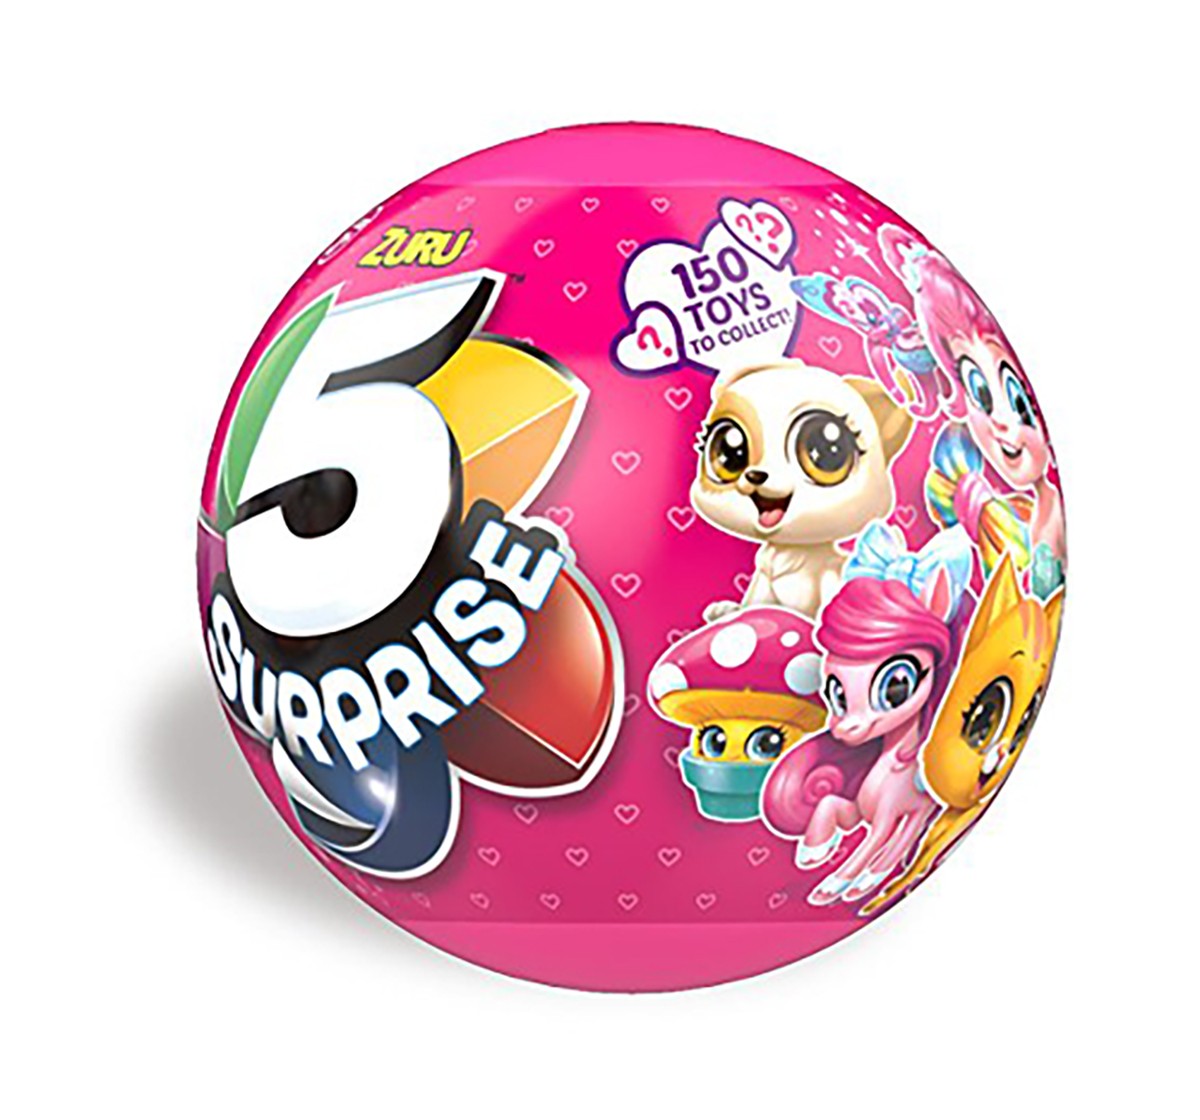  Zuru 5 Surprise Pink Mystery Capsule Collectable Novelty for Kids age 2Y+ 